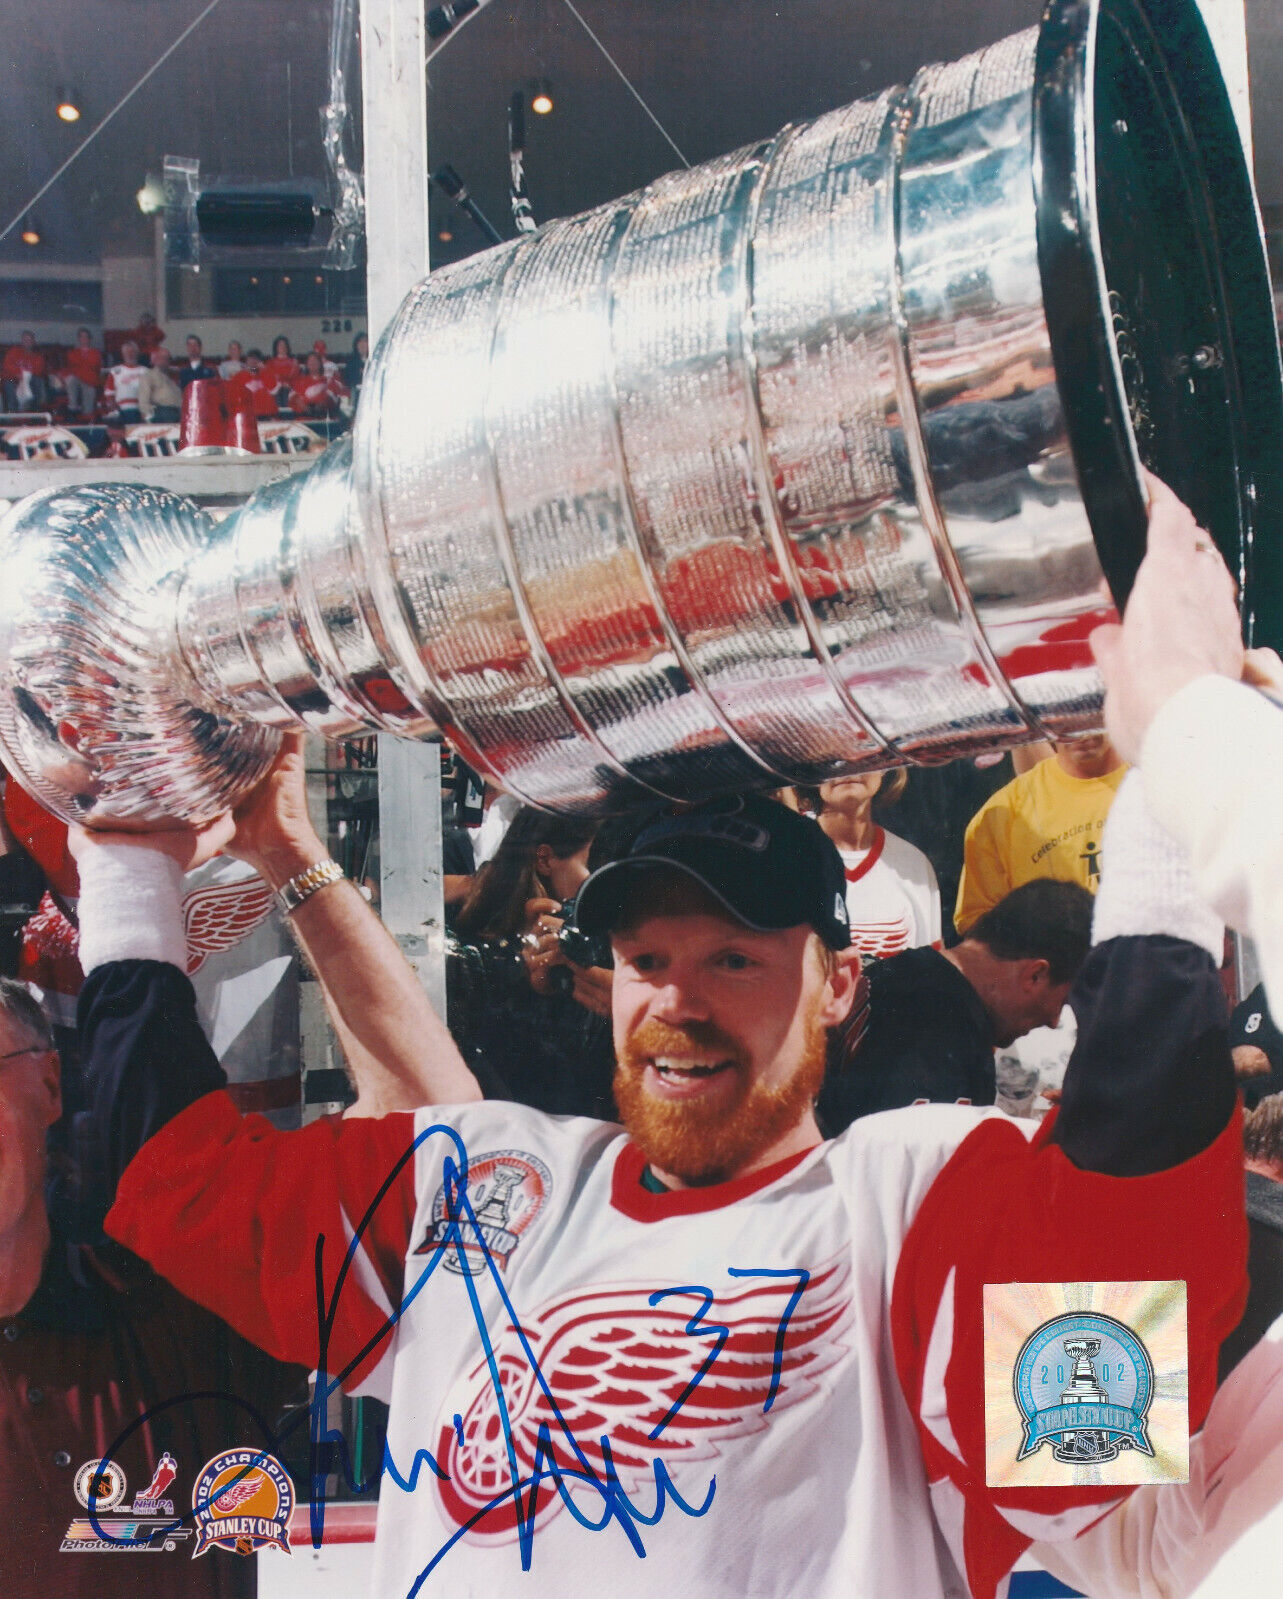 KRIS DRAPER SIGNED DETROIT RED WINGS 2002 STANLEY CUP 8x10 Photo Poster painting! Autograph